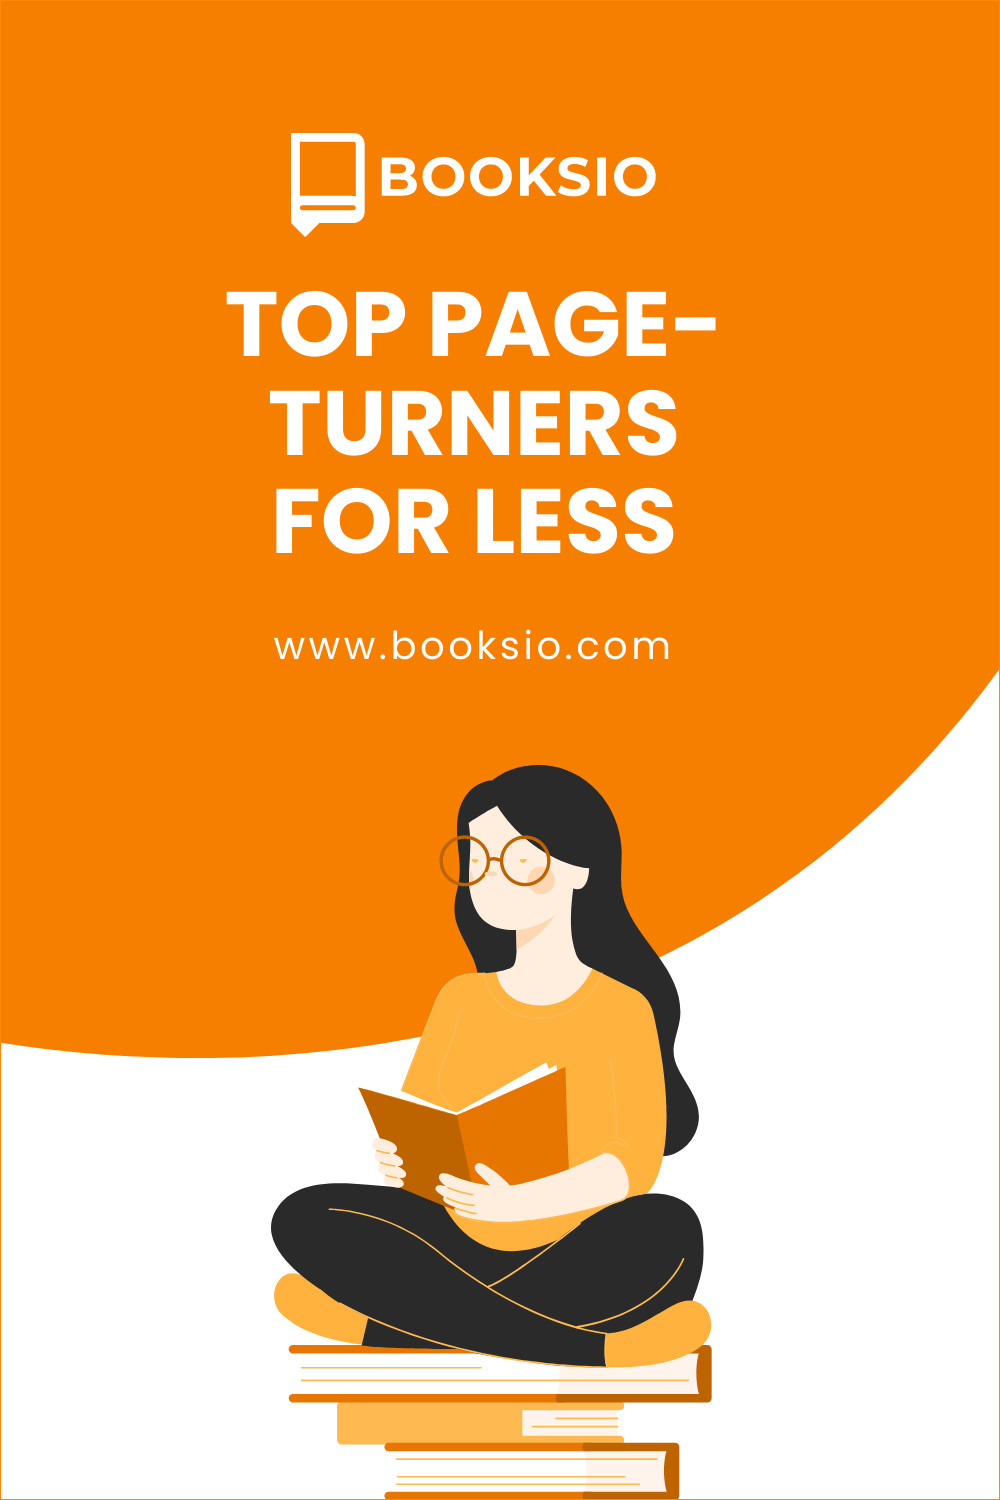 Top Page-turners for Less Books